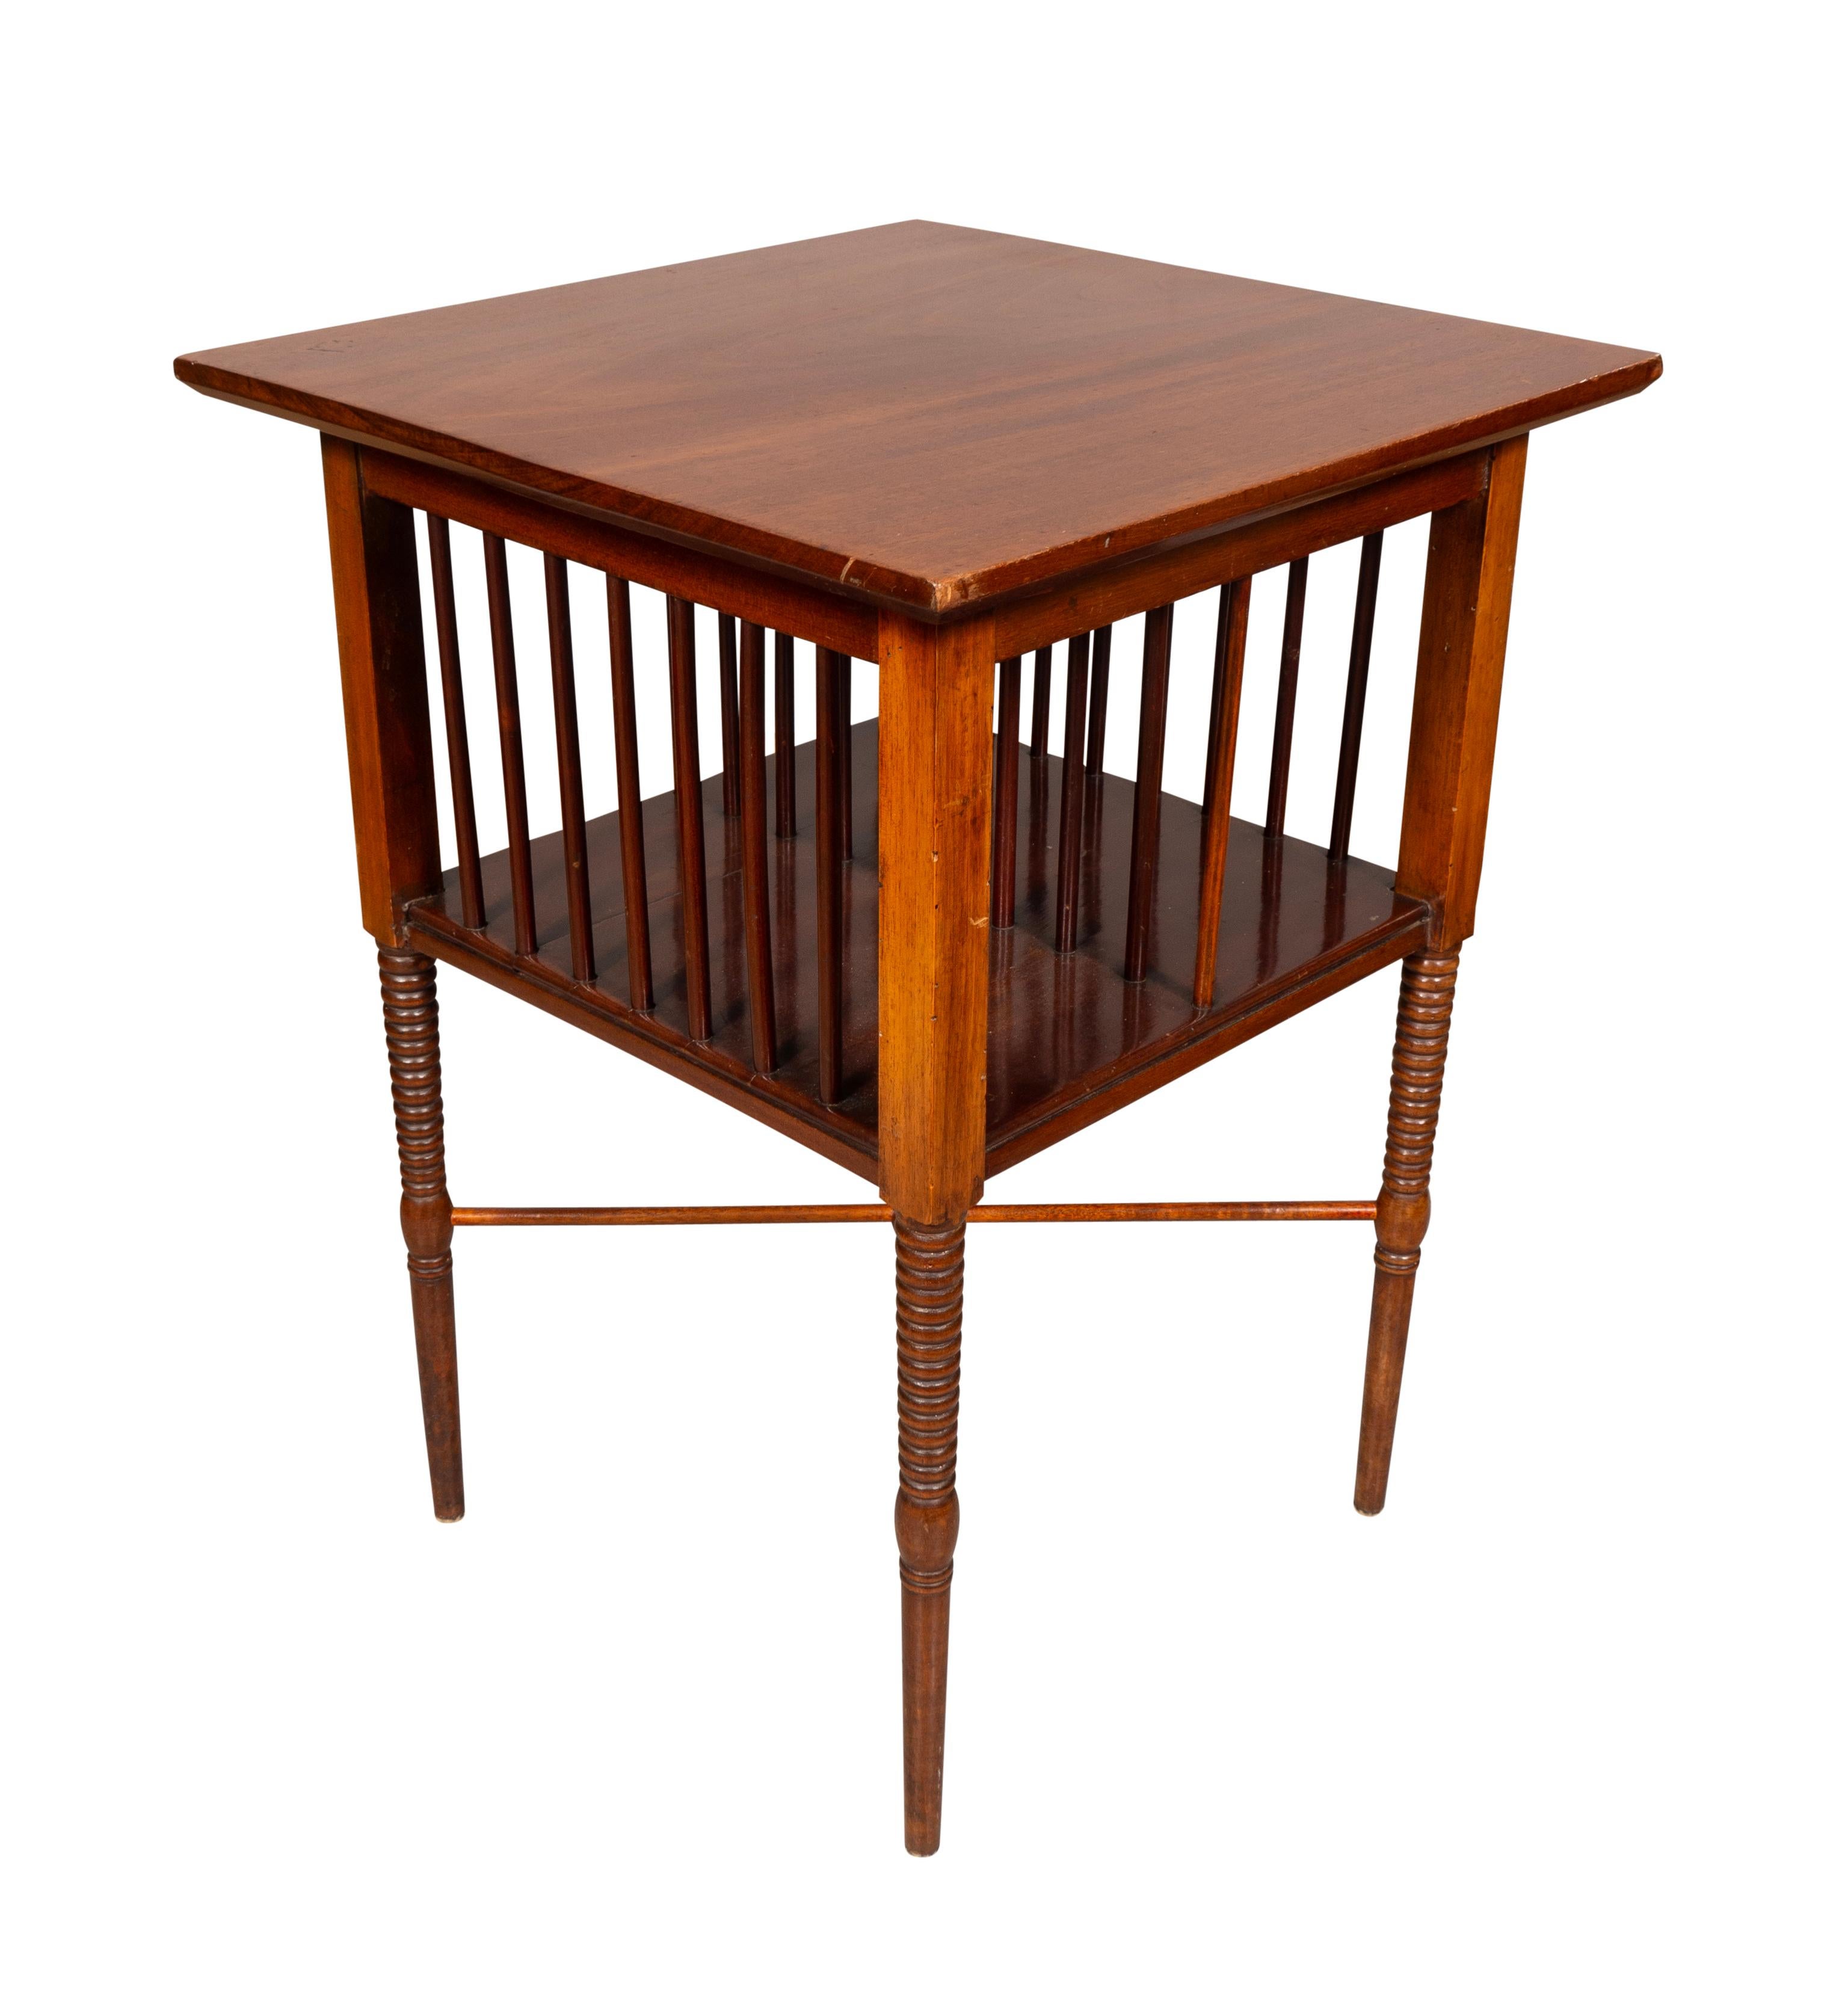 English Aesthetic Mahogany Table Attributed To Godwin In Good Condition For Sale In Essex, MA